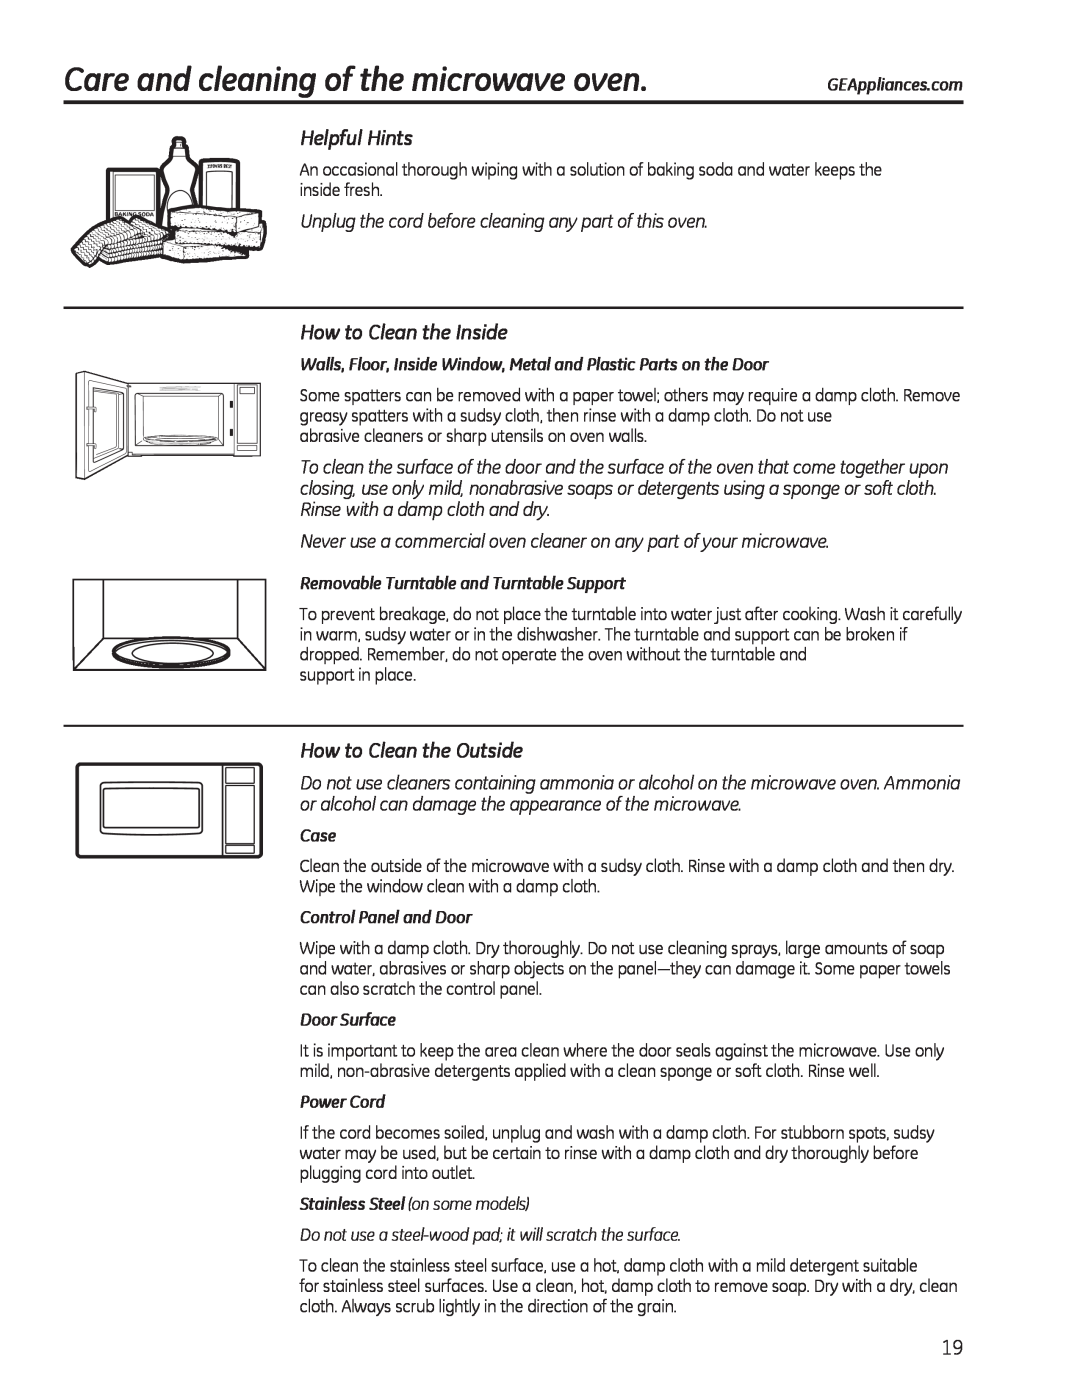 GE JES1140 Care and cleaning of the microwave oven, Helpful Hints, How to Clean the Inside, How to Clean the Outside 